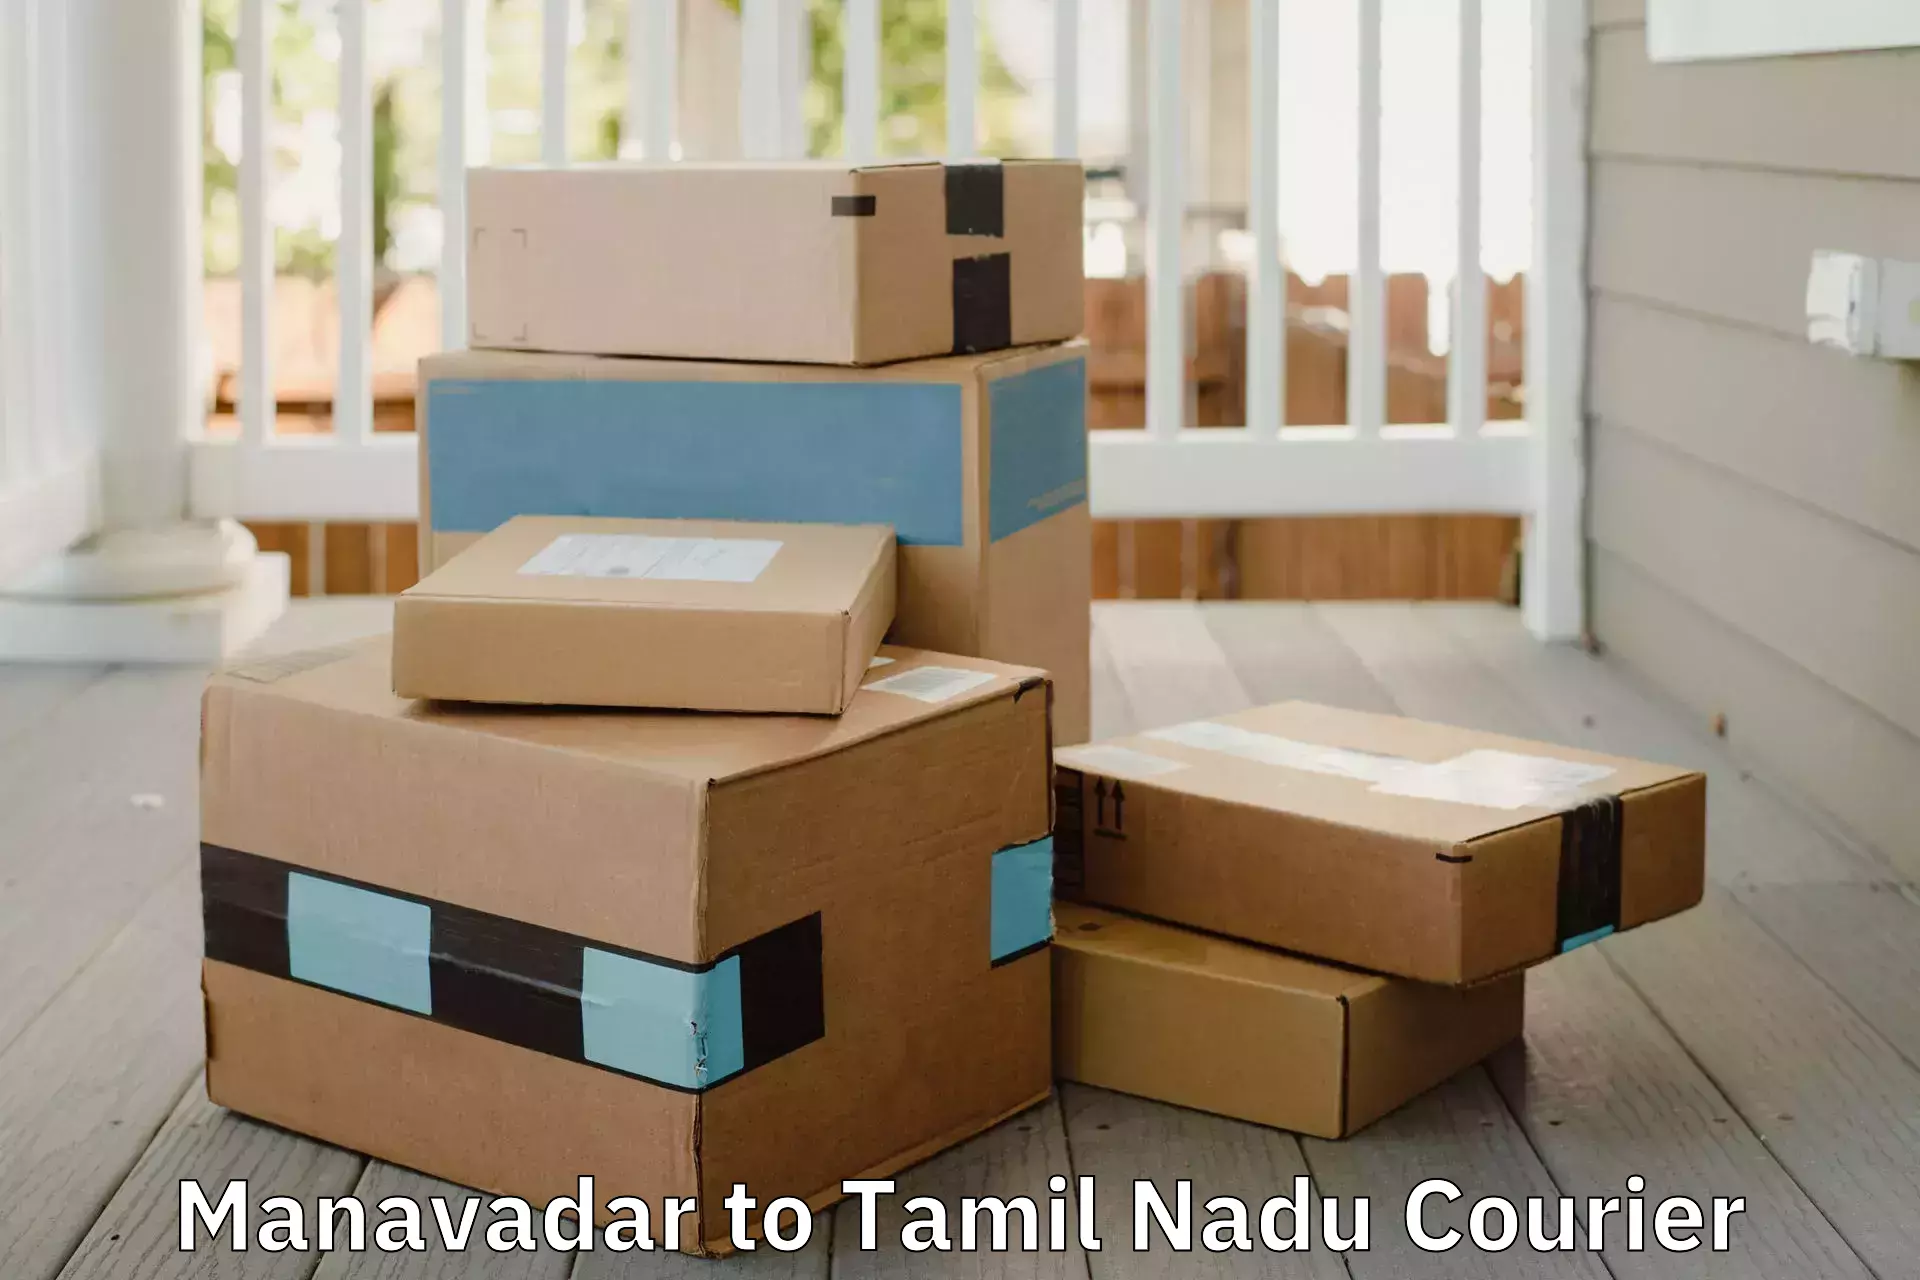 Moving and packing experts Manavadar to Trichy